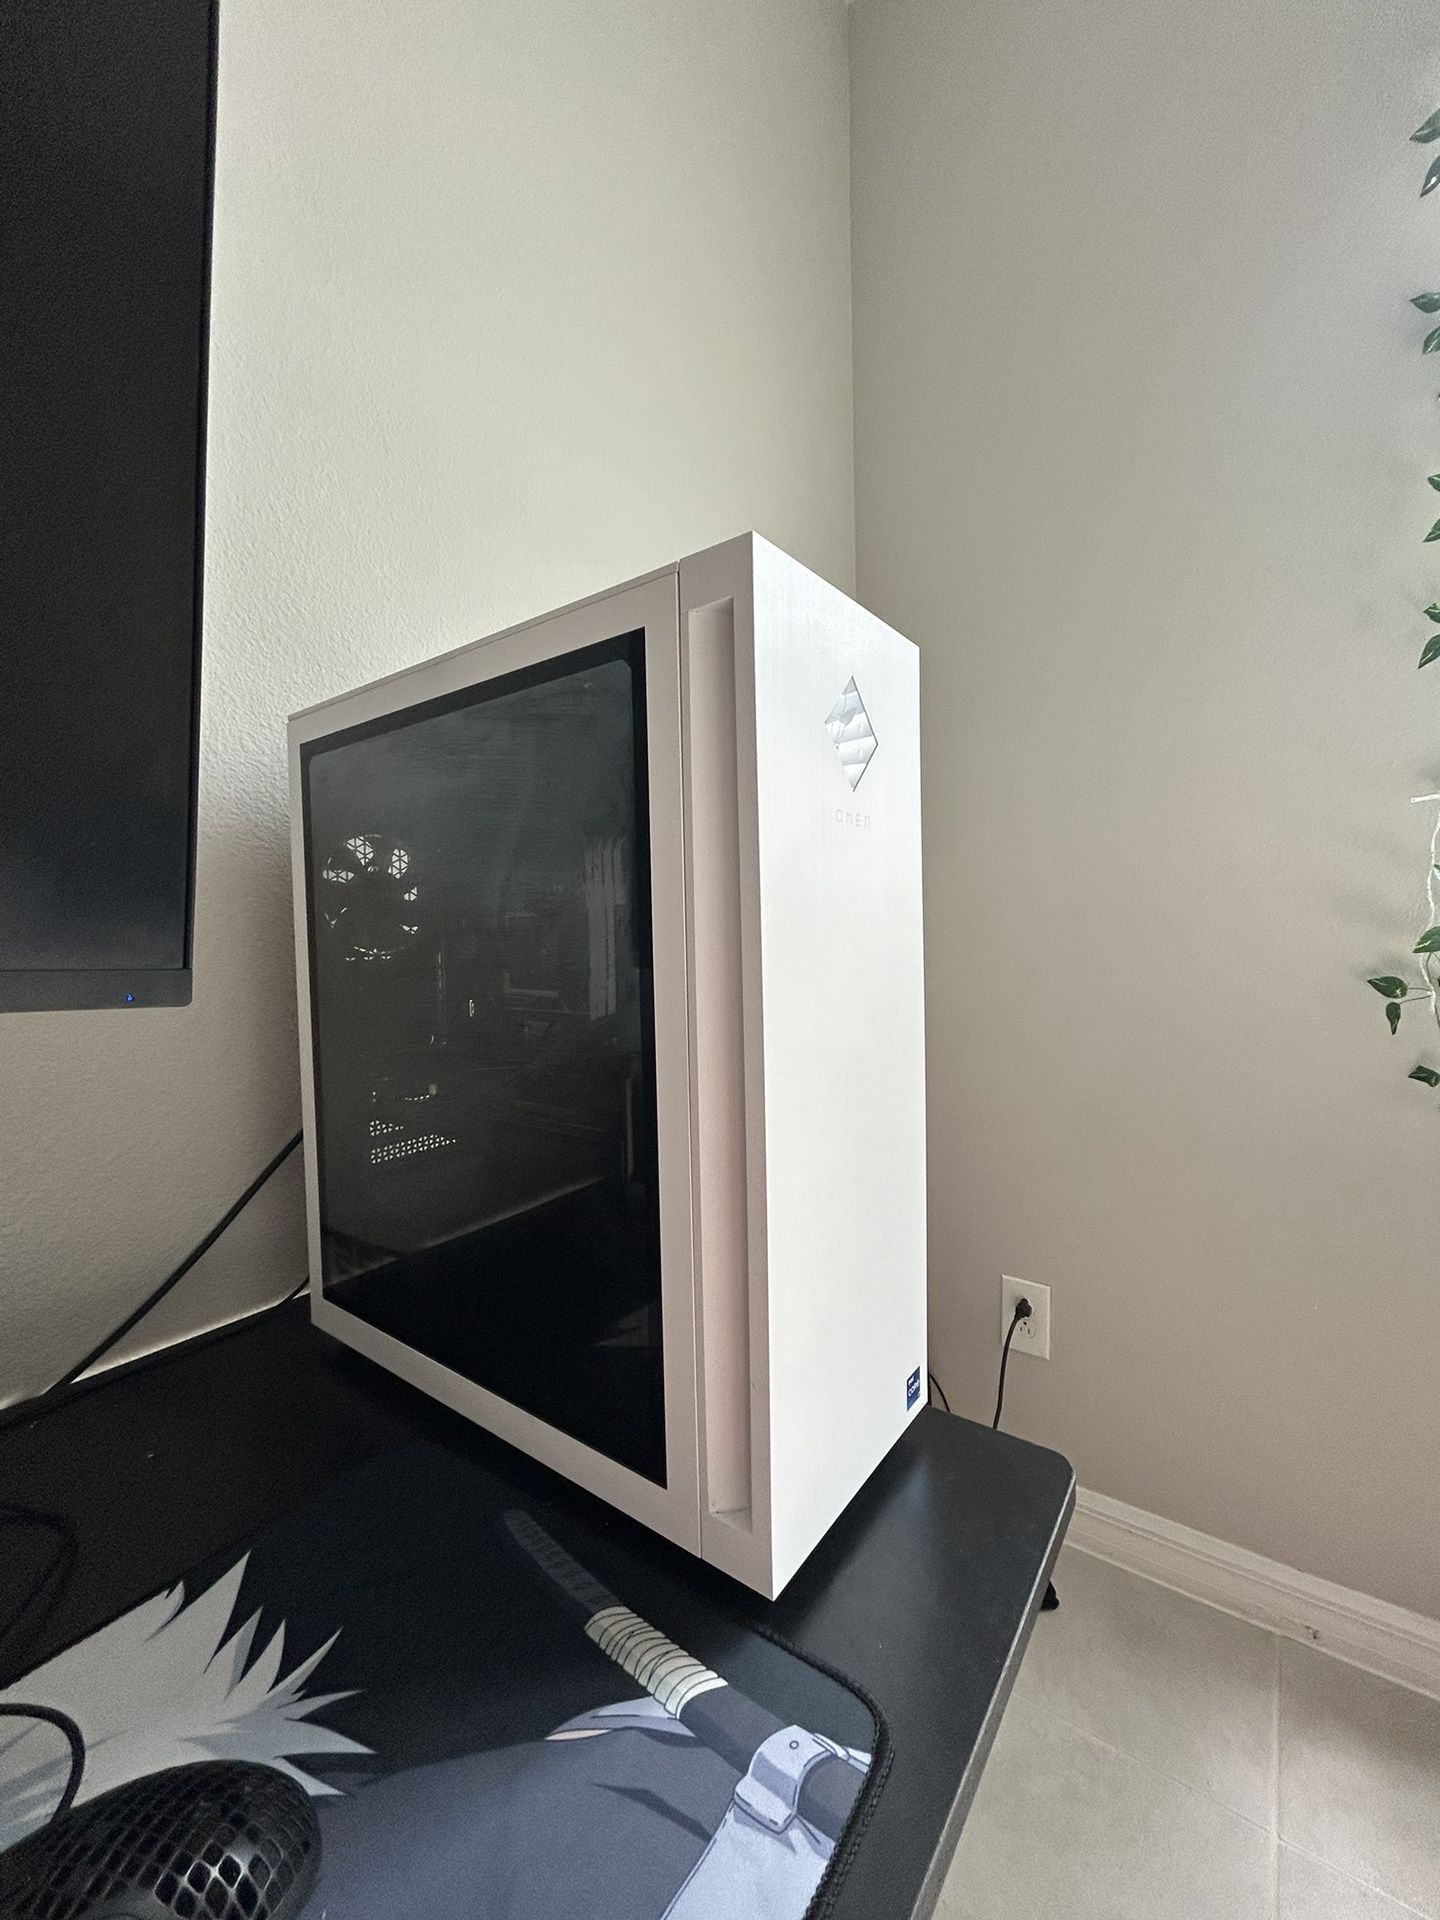 Gaming PC & monitor For Sale 